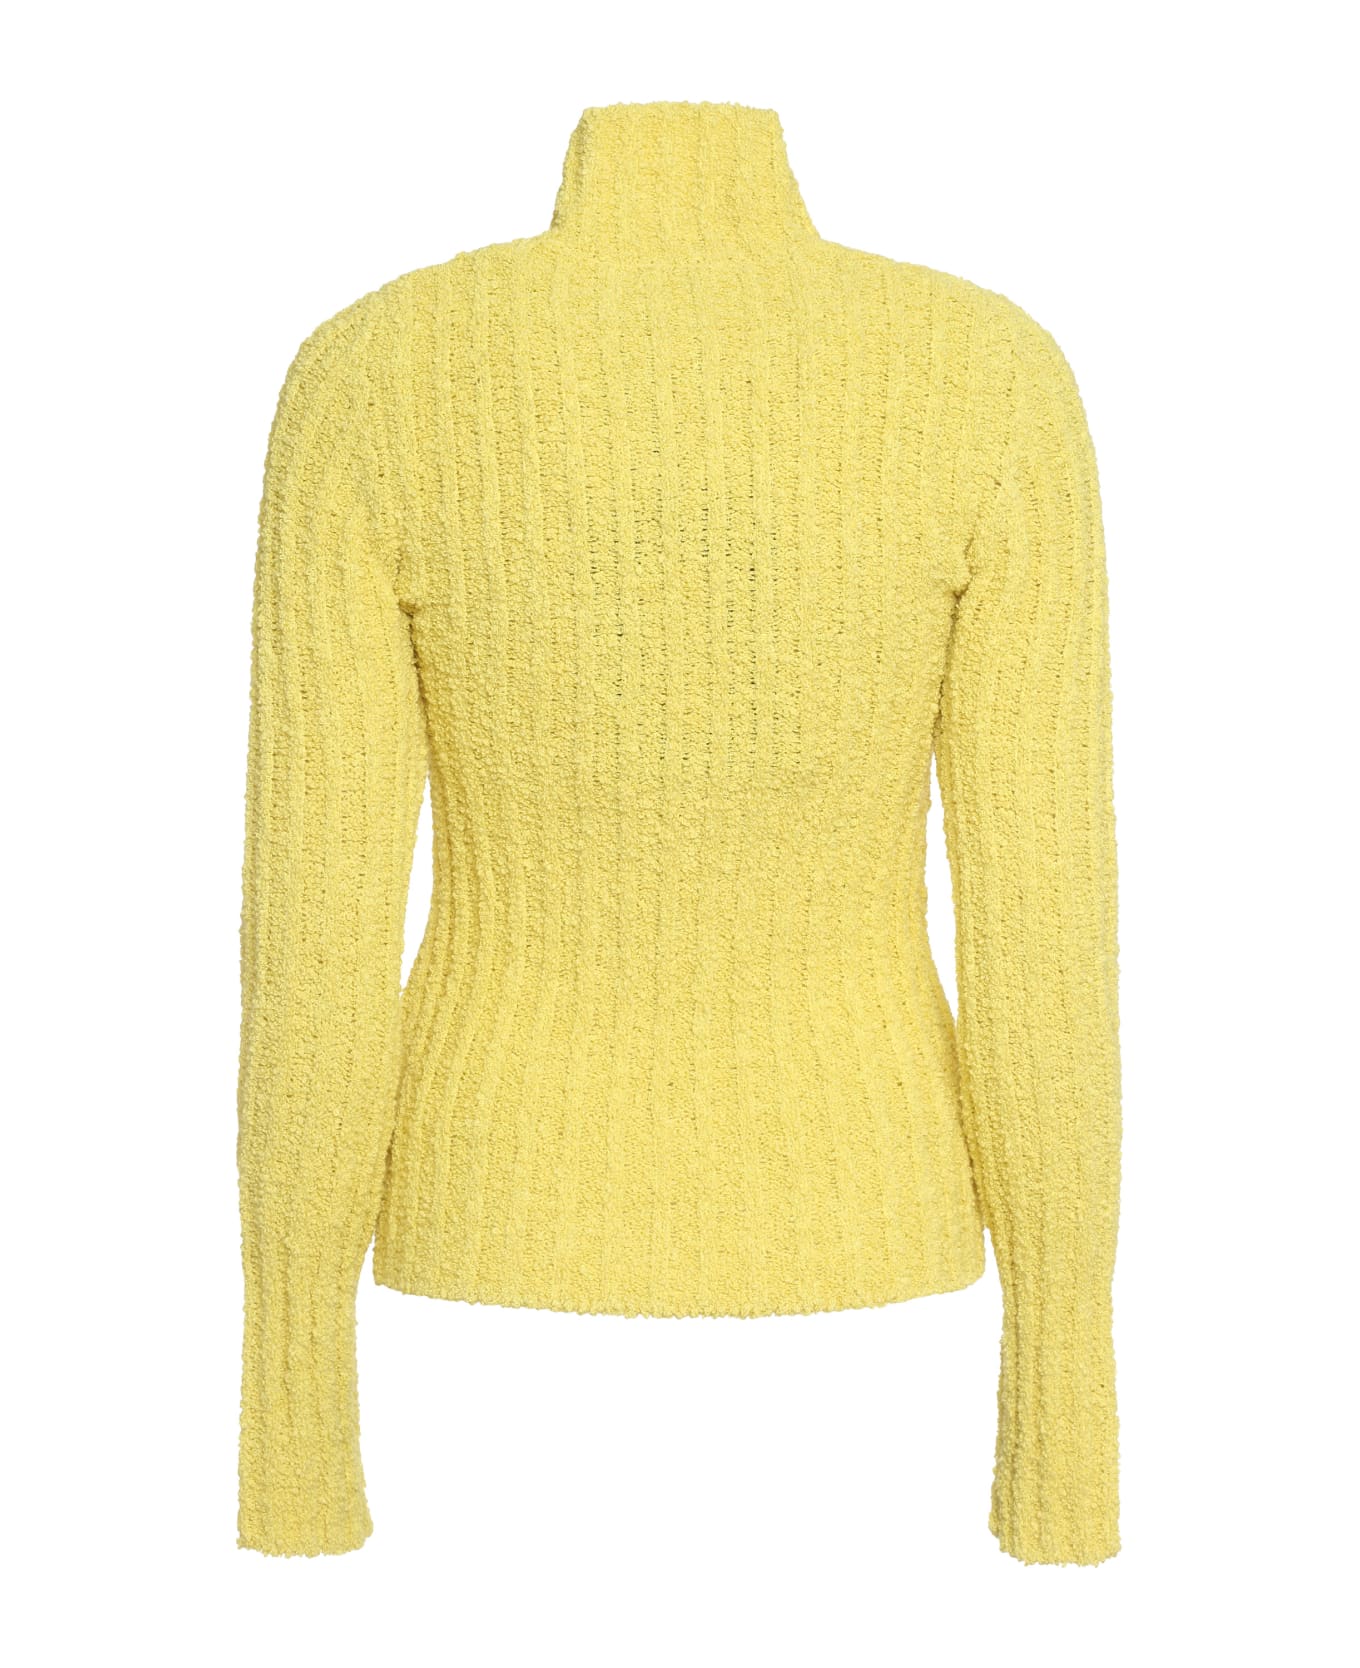 Moncler Genius 1 Moncler Jw Anderson - Tricot Knit Turtleneck Pullover - Yellow